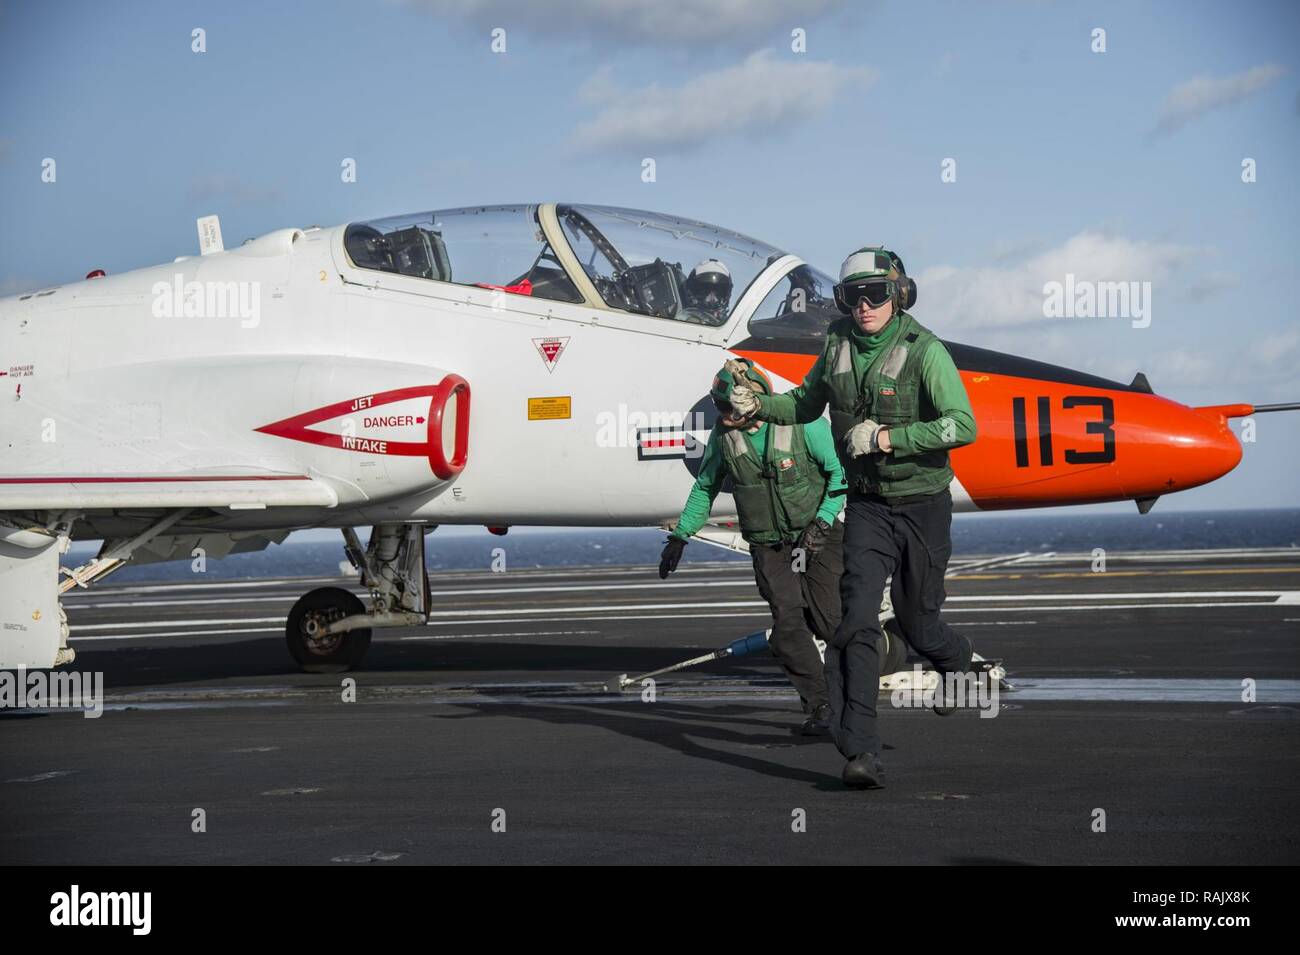 ATLANTIC OCEAN (Feb. 10, 2017) Aviation Boatswain’s Mate Airman (Equipment), Bradley Stine, right, and Aviation Boatswain’s Mate 2nd Class (Equipment) Tyler Cantrall, complete their preflight inspection on the arresting gear of a T-45C Goshawk assigned to Carrier Training Wing (CTW) 1 prepares to launch from the flight deck of the aircraft carrier USS Dwight D. Eisenhower (CVN 69) (Ike). Ike is currently conducting aircraft carrier qualifications during the sustainment phase of the Optimized Fleet Response Plan (OFRP). Stock Photo